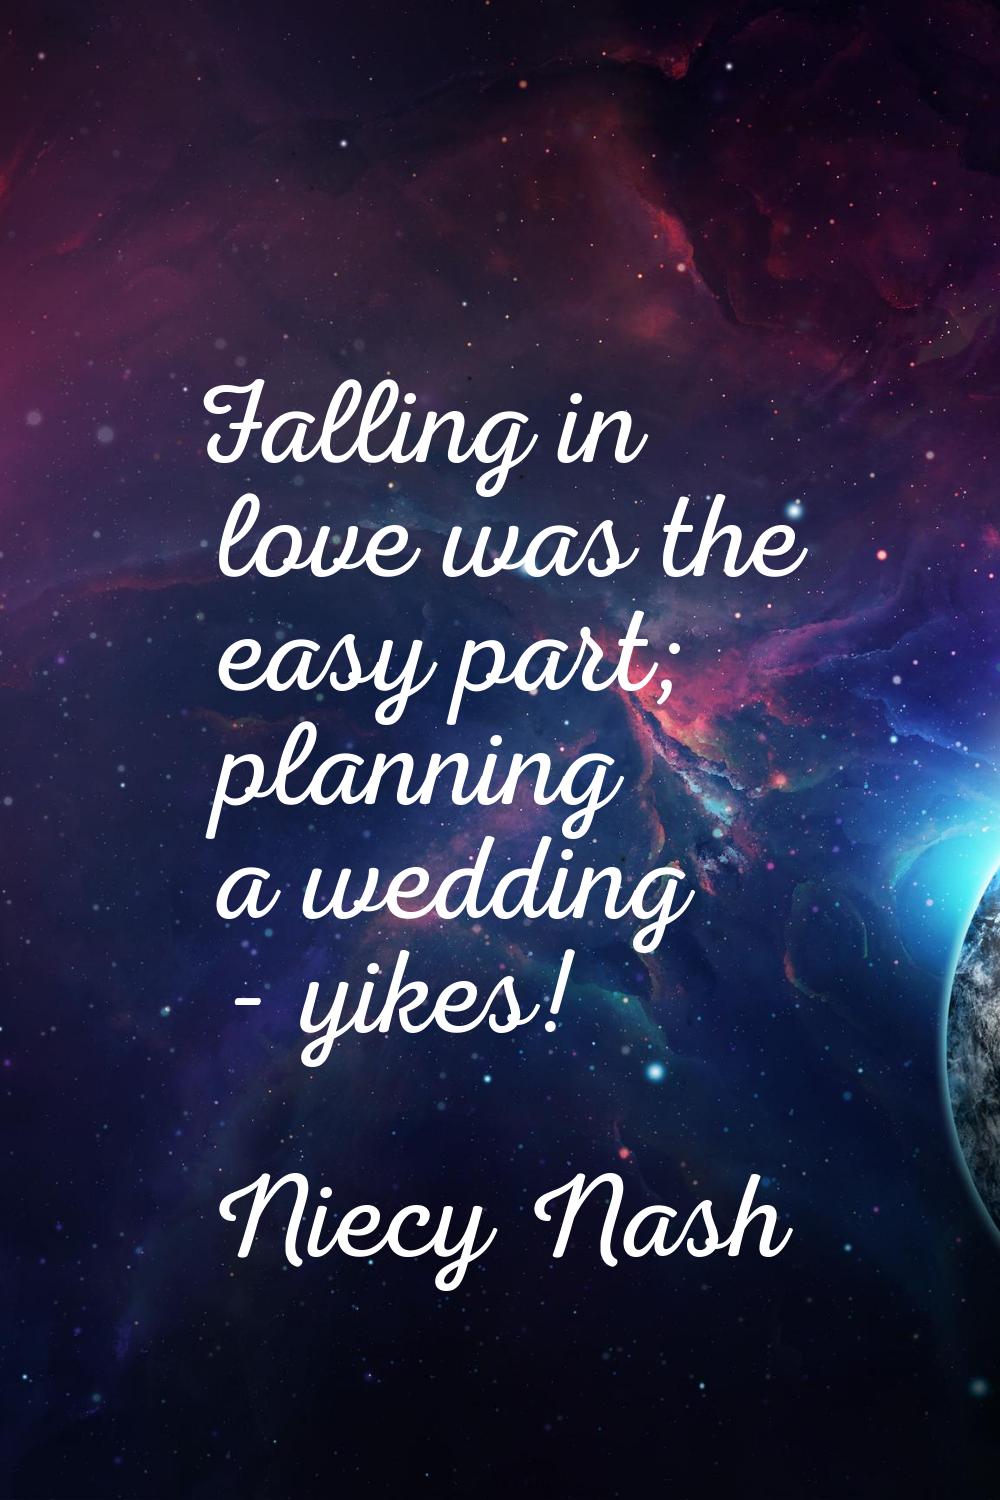 Falling in love was the easy part; planning a wedding - yikes!